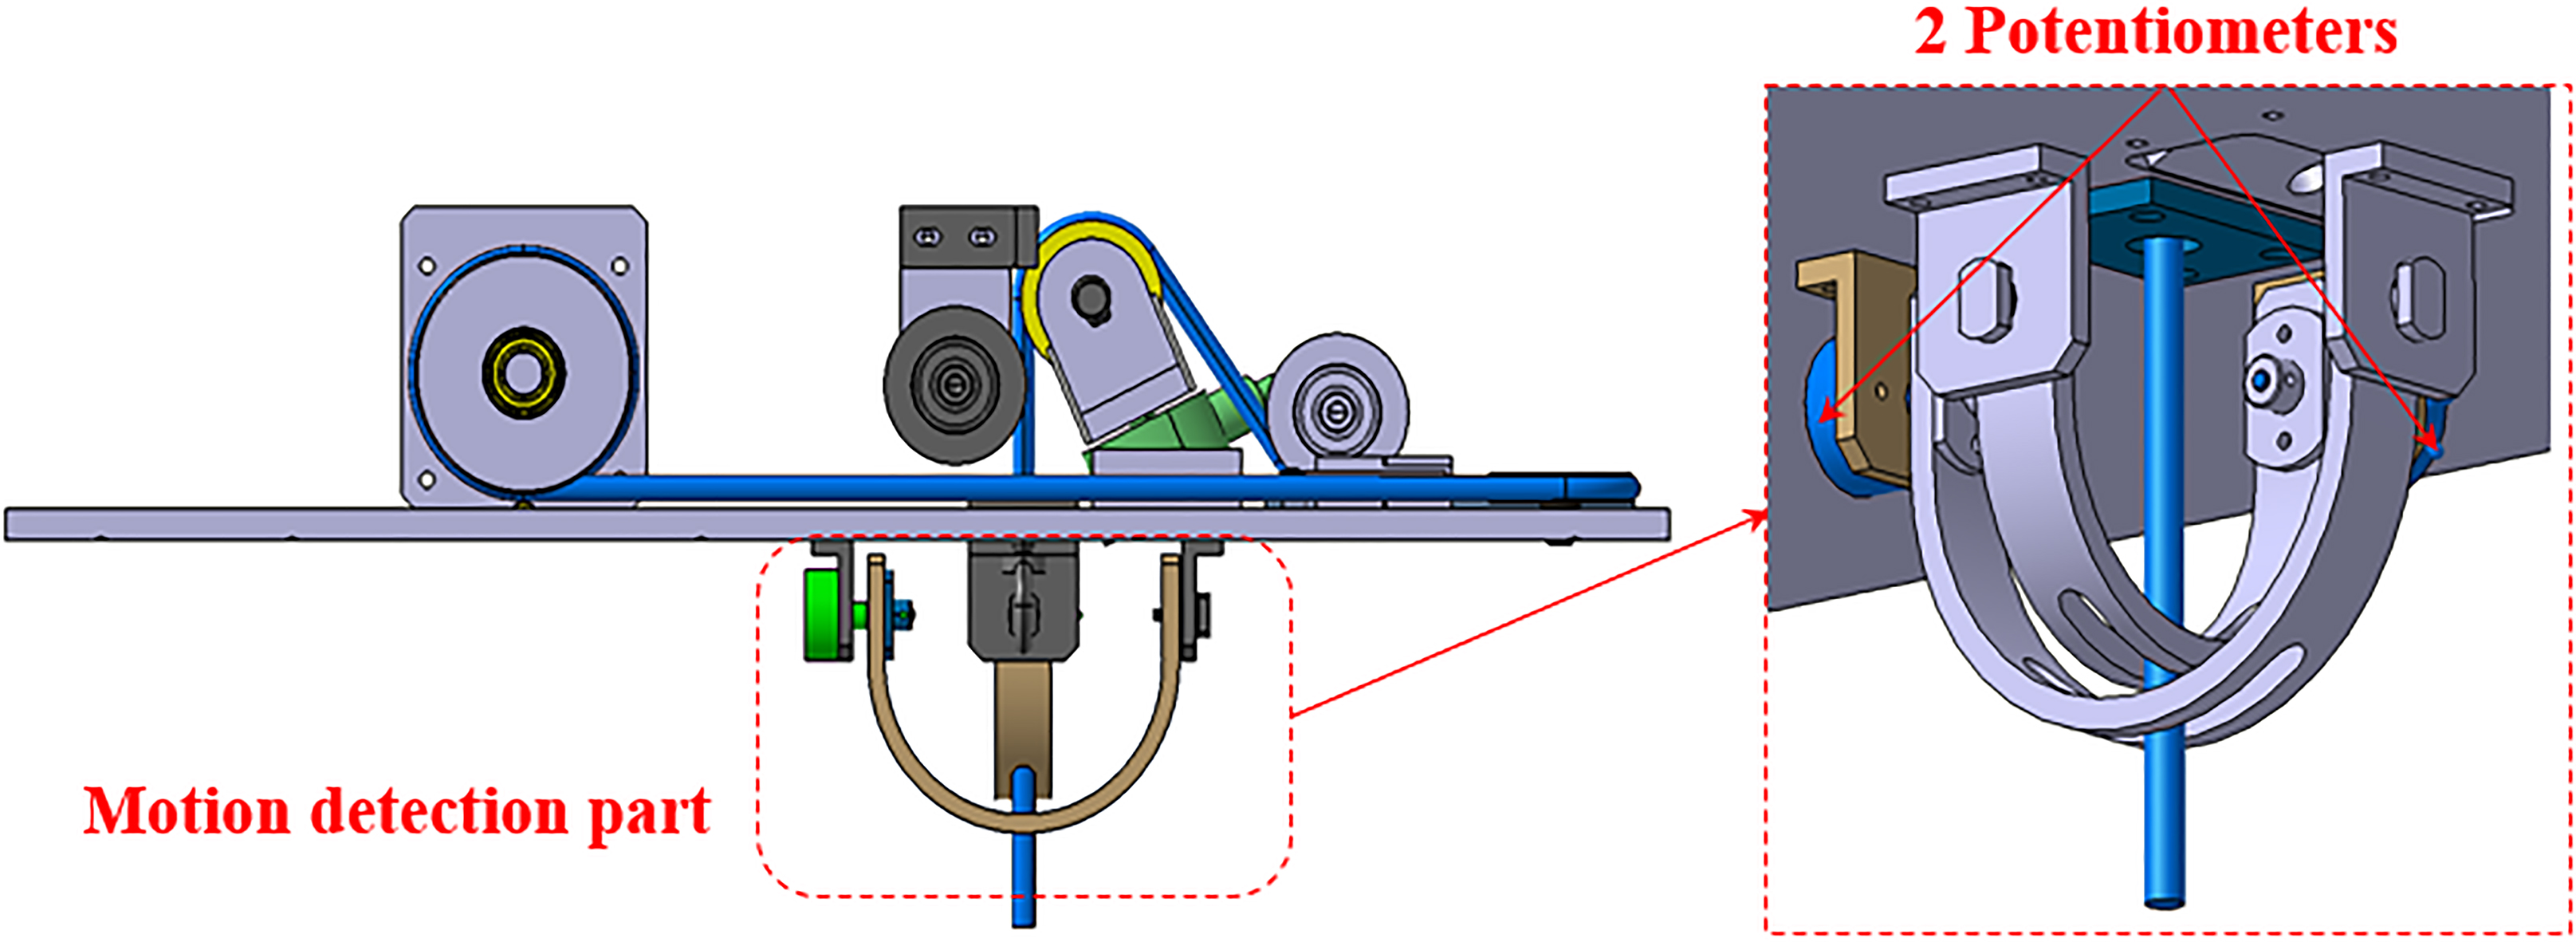 Design of motion detection part using two potentiometers.